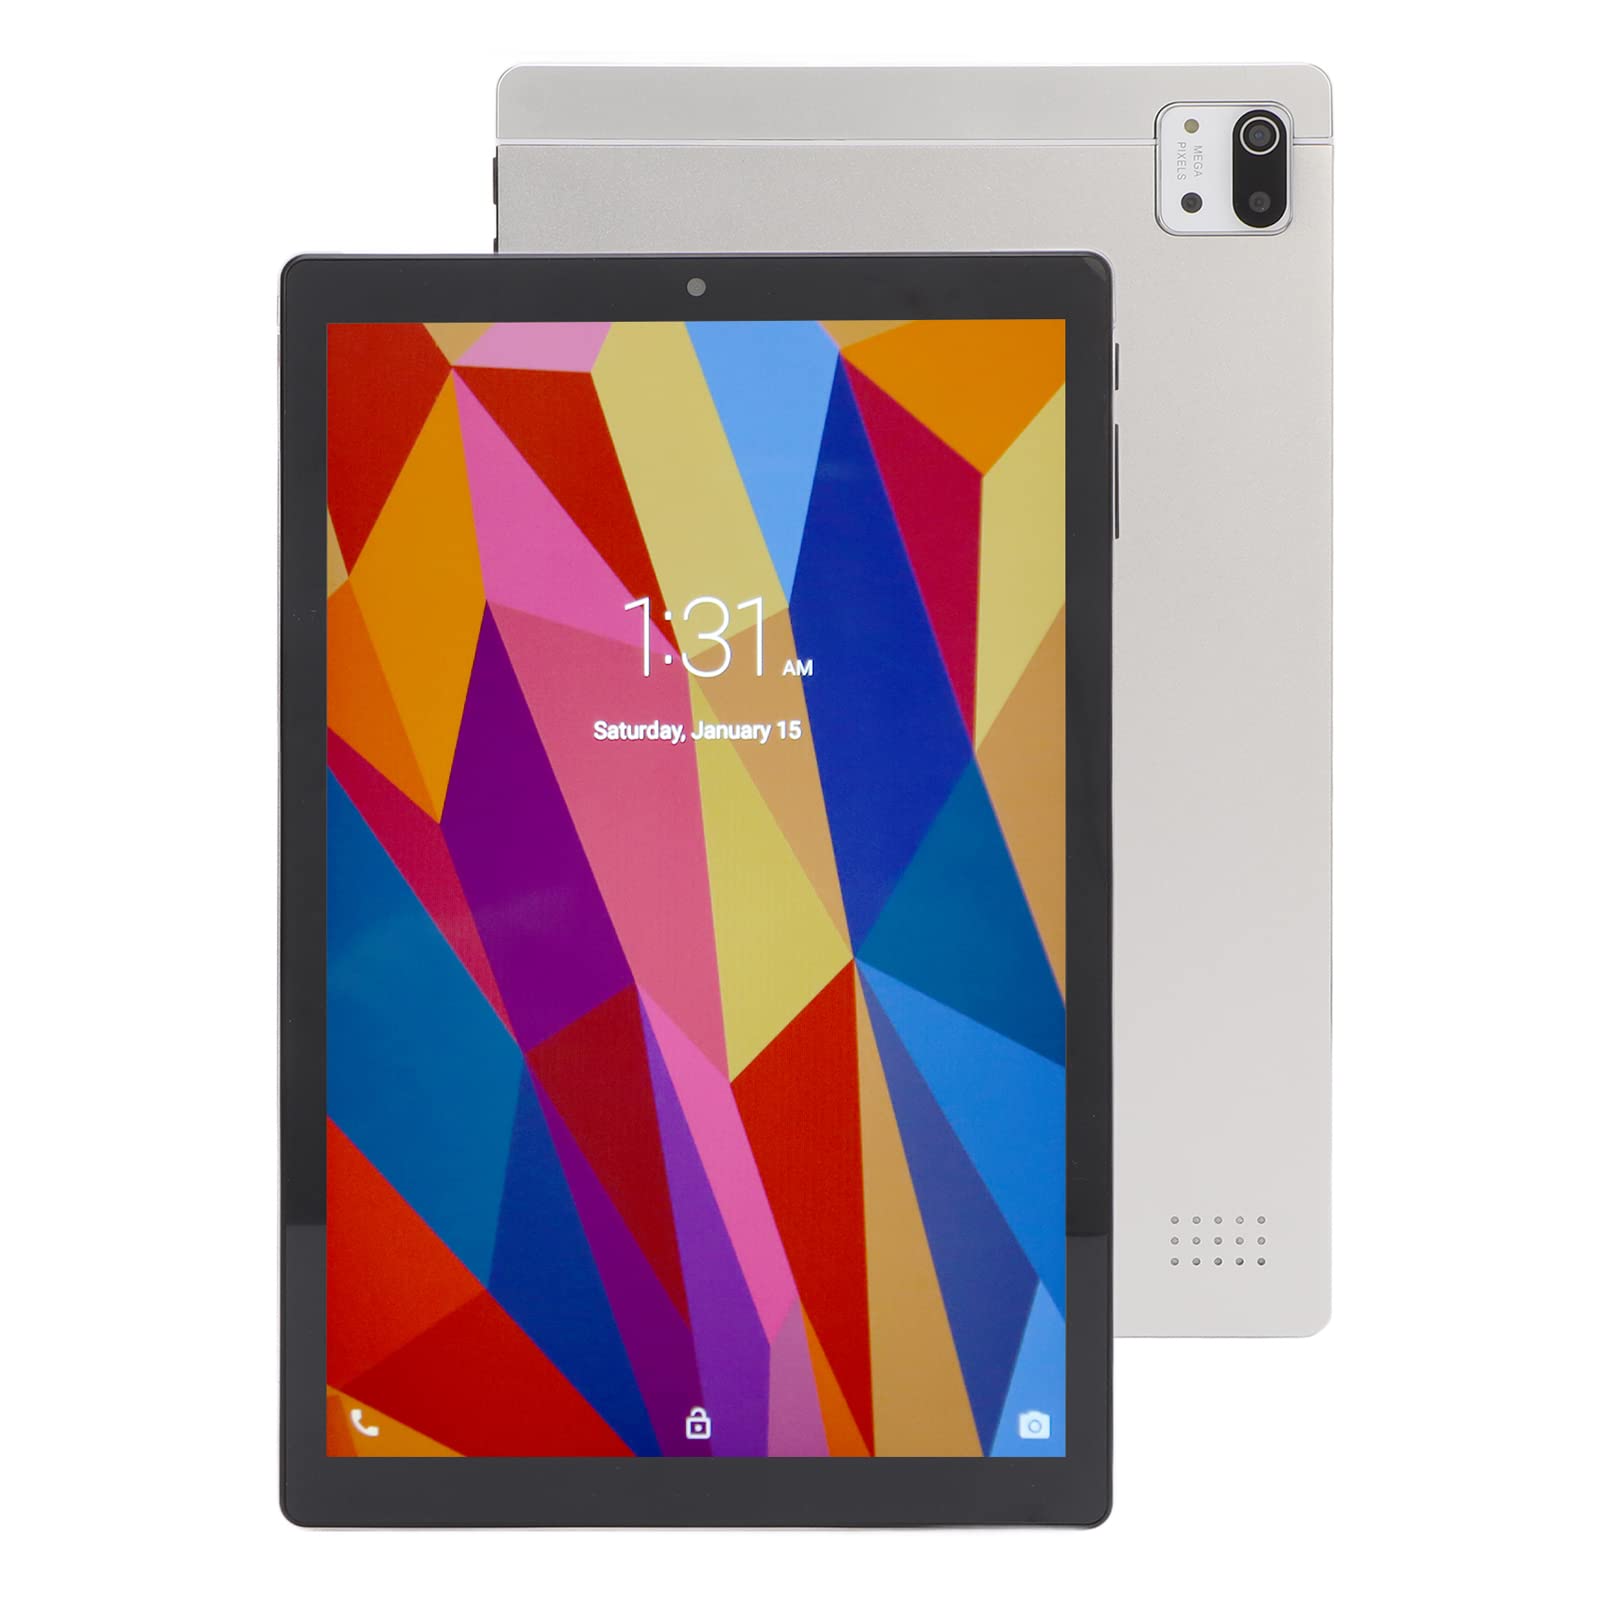 10.1 Inch Tablet, Android11 2.4 5G WiFi Silver Tablet MT6592 8 Core CPU Home Dual Camera (US Plug)